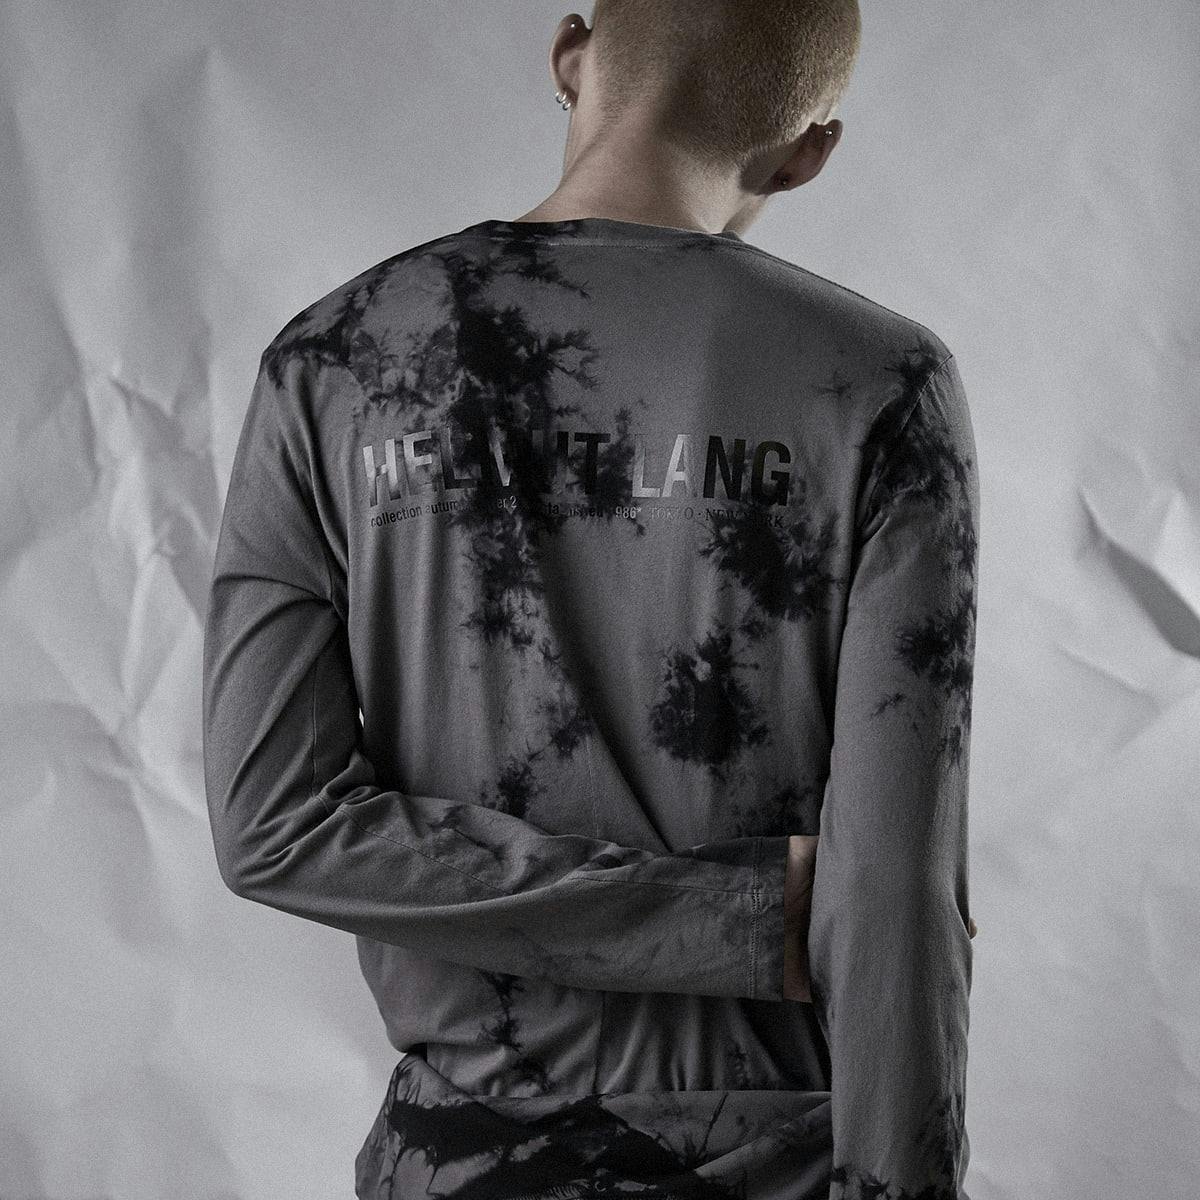 Check Out The Latest Helmut Lang AW18 Editorial at END.